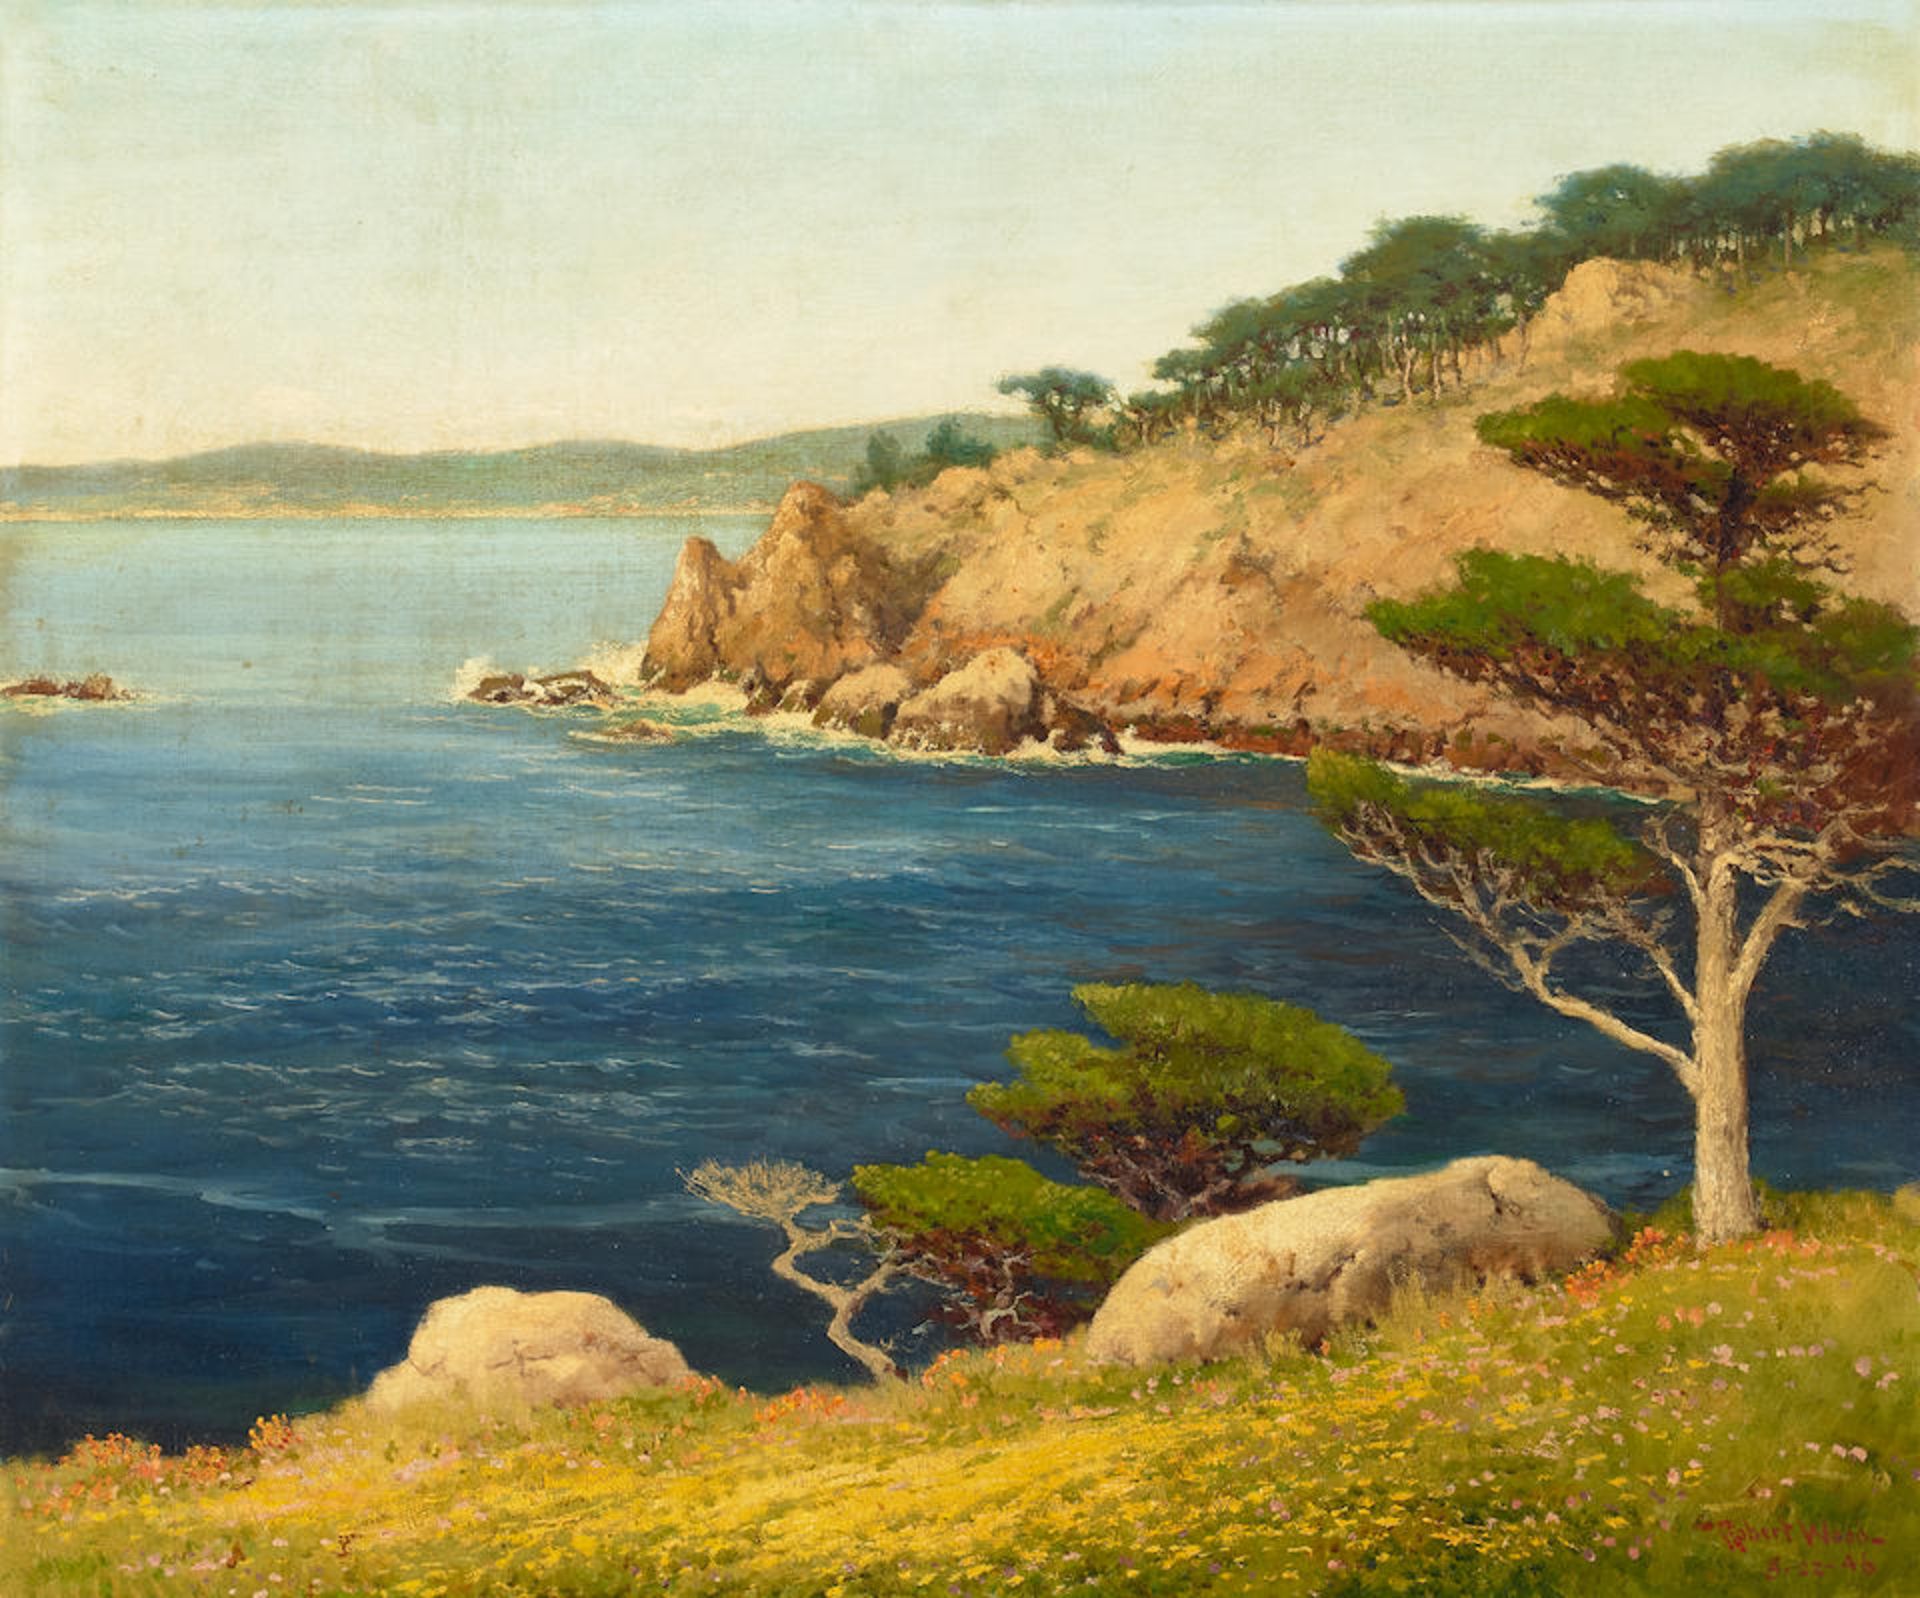 Robert William Wood (1889-1979) Carmel-by-the-Sea 25 x 30 in. framed 30 1/2 x 35 1/2 in. - Image 2 of 4